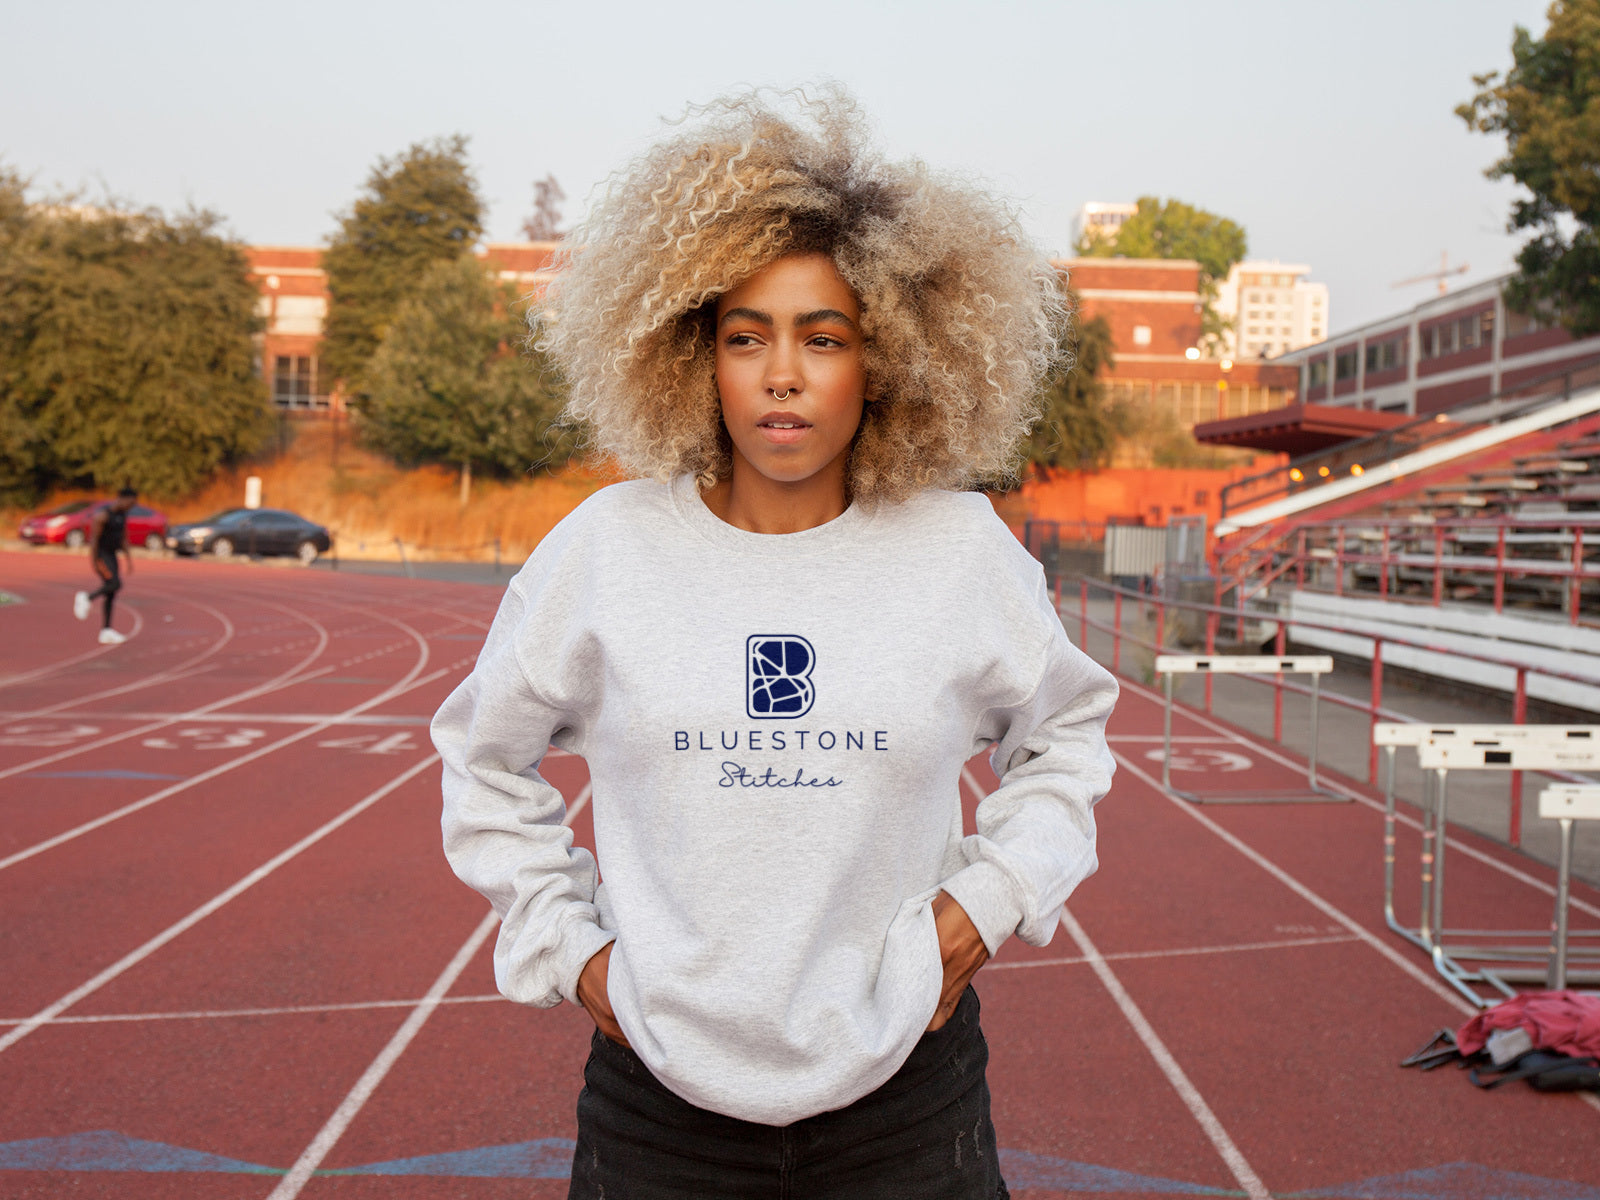 A woman standing on a running track, wearing a grey crewneck with the full Bluestone Stitches logo in blue.